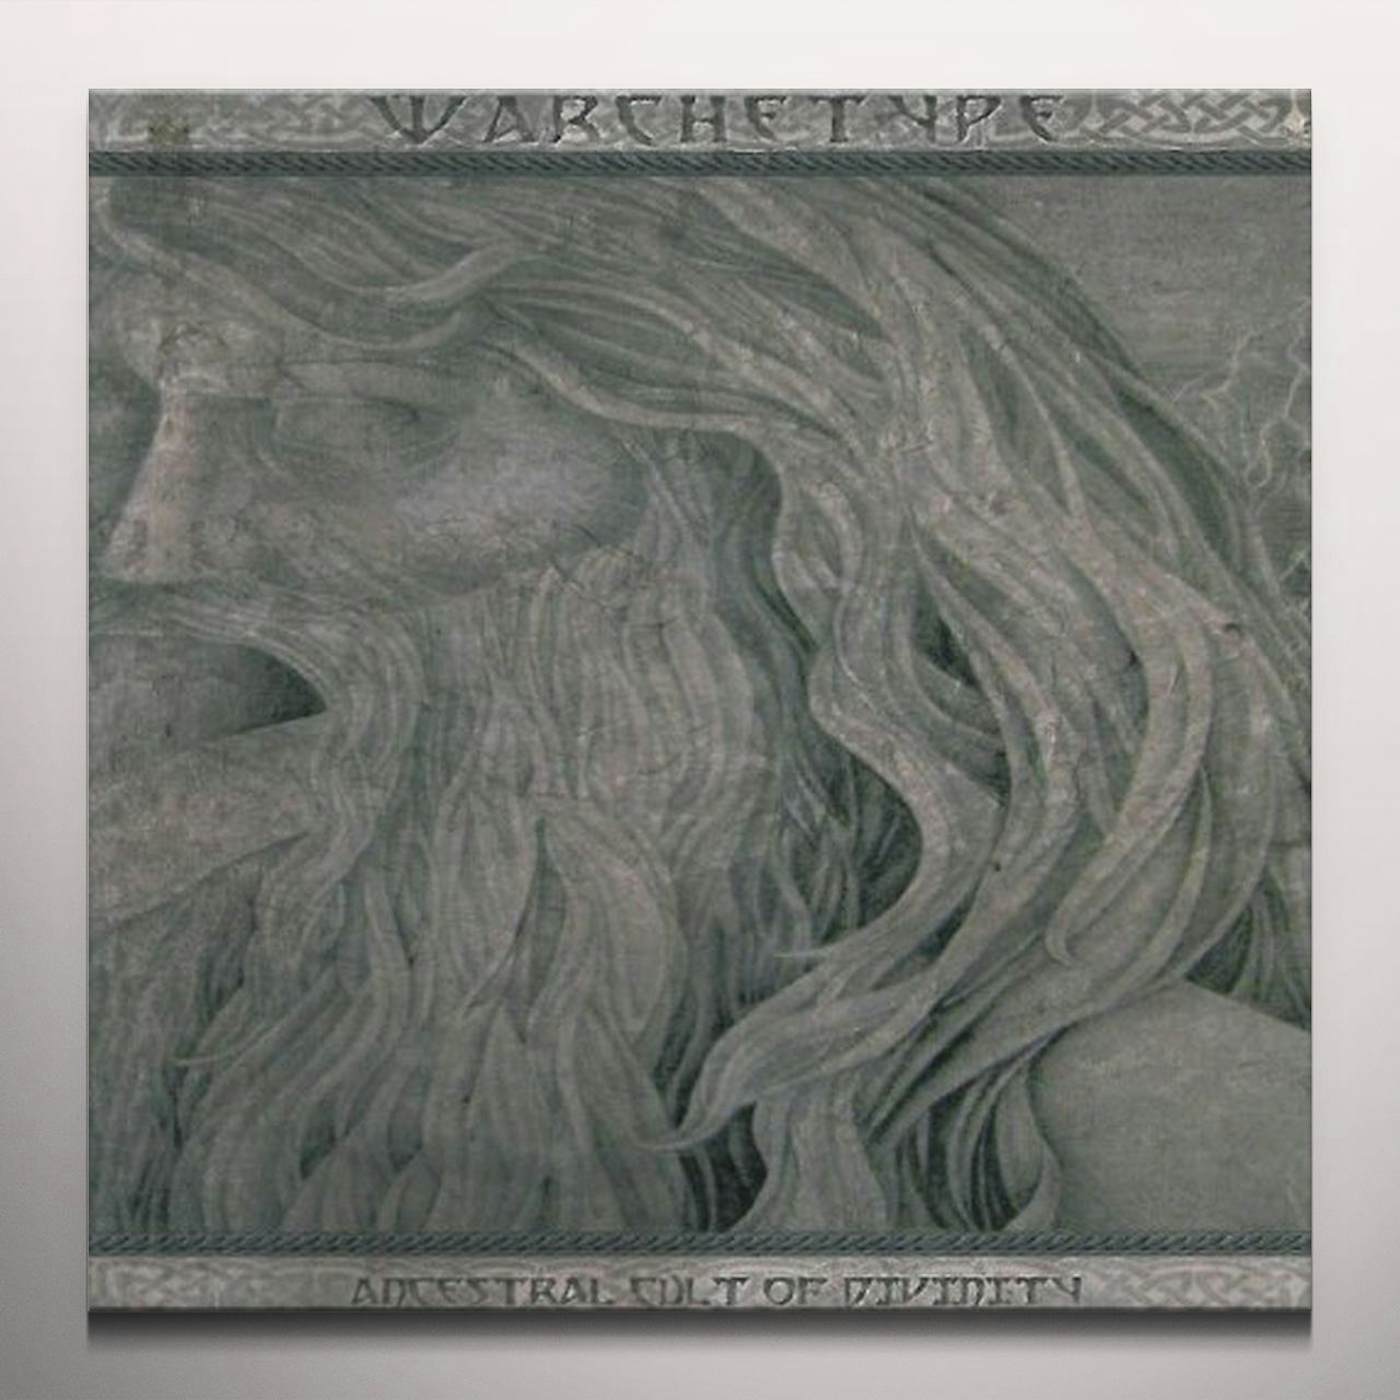 Warchetype Ancestral Cult of Divinity Vinyl Record